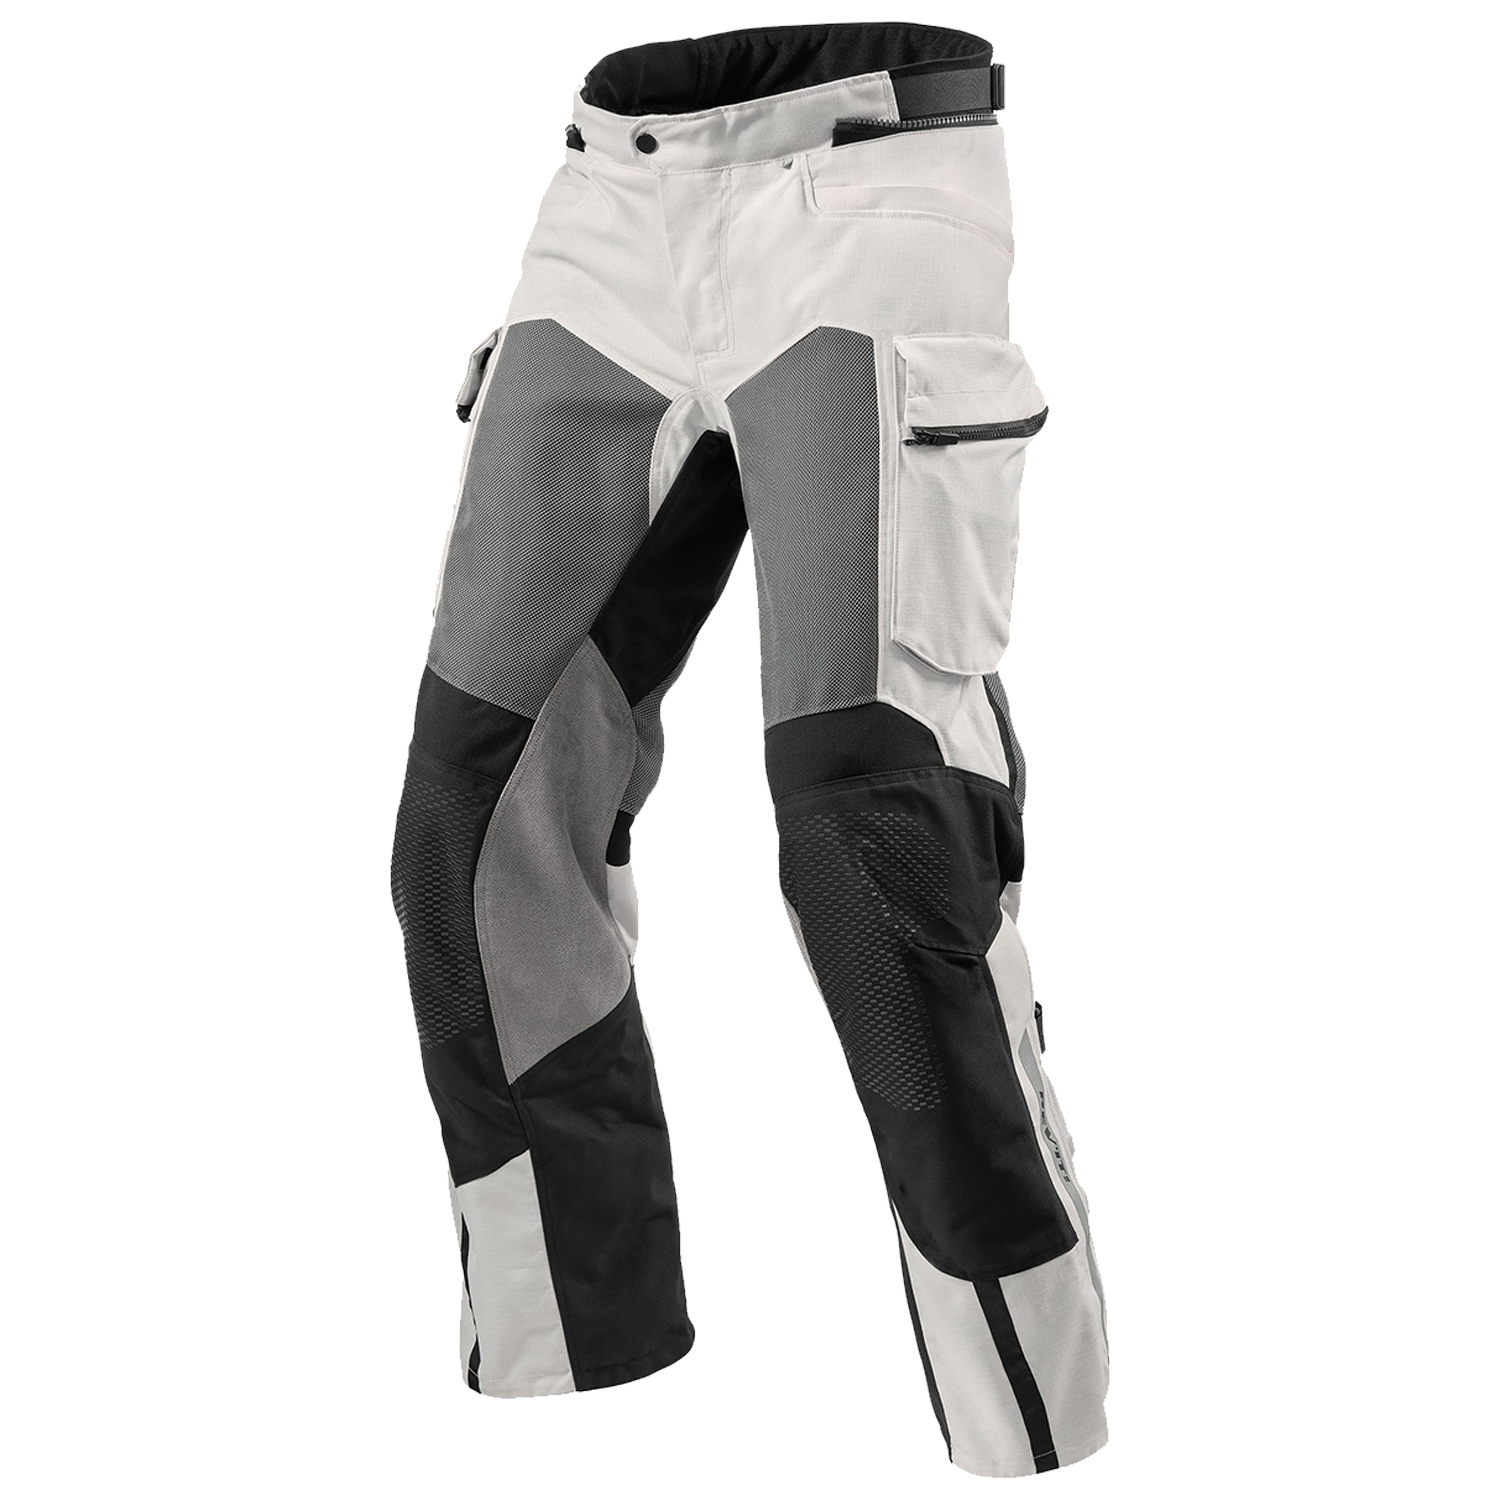 Image of REV'IT! Cayenne 2 Silver Short Motorcycle Pants Size M ID 8700001335515